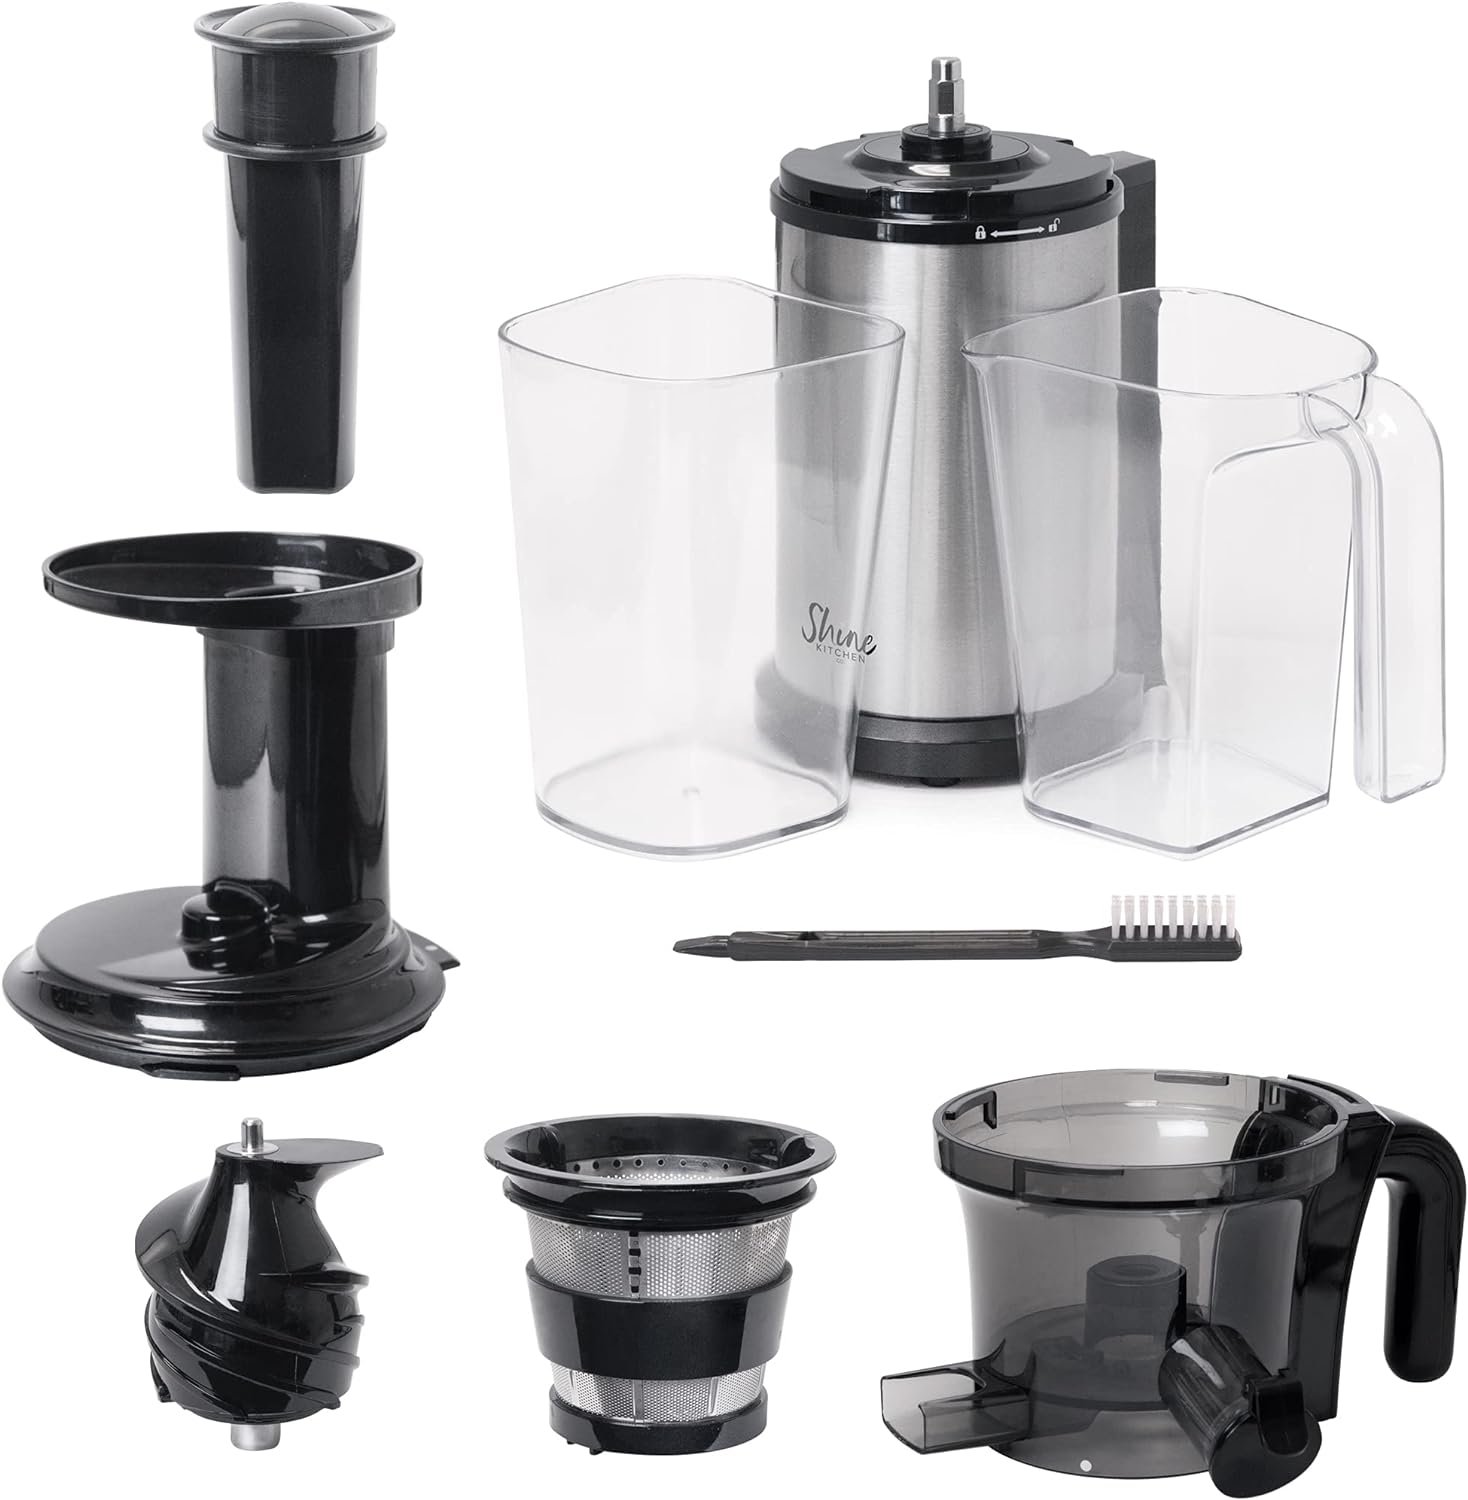 Shine Kitchen Co SJV-107-A Cold Press Slow Masticating Juicer, Stainless Steel